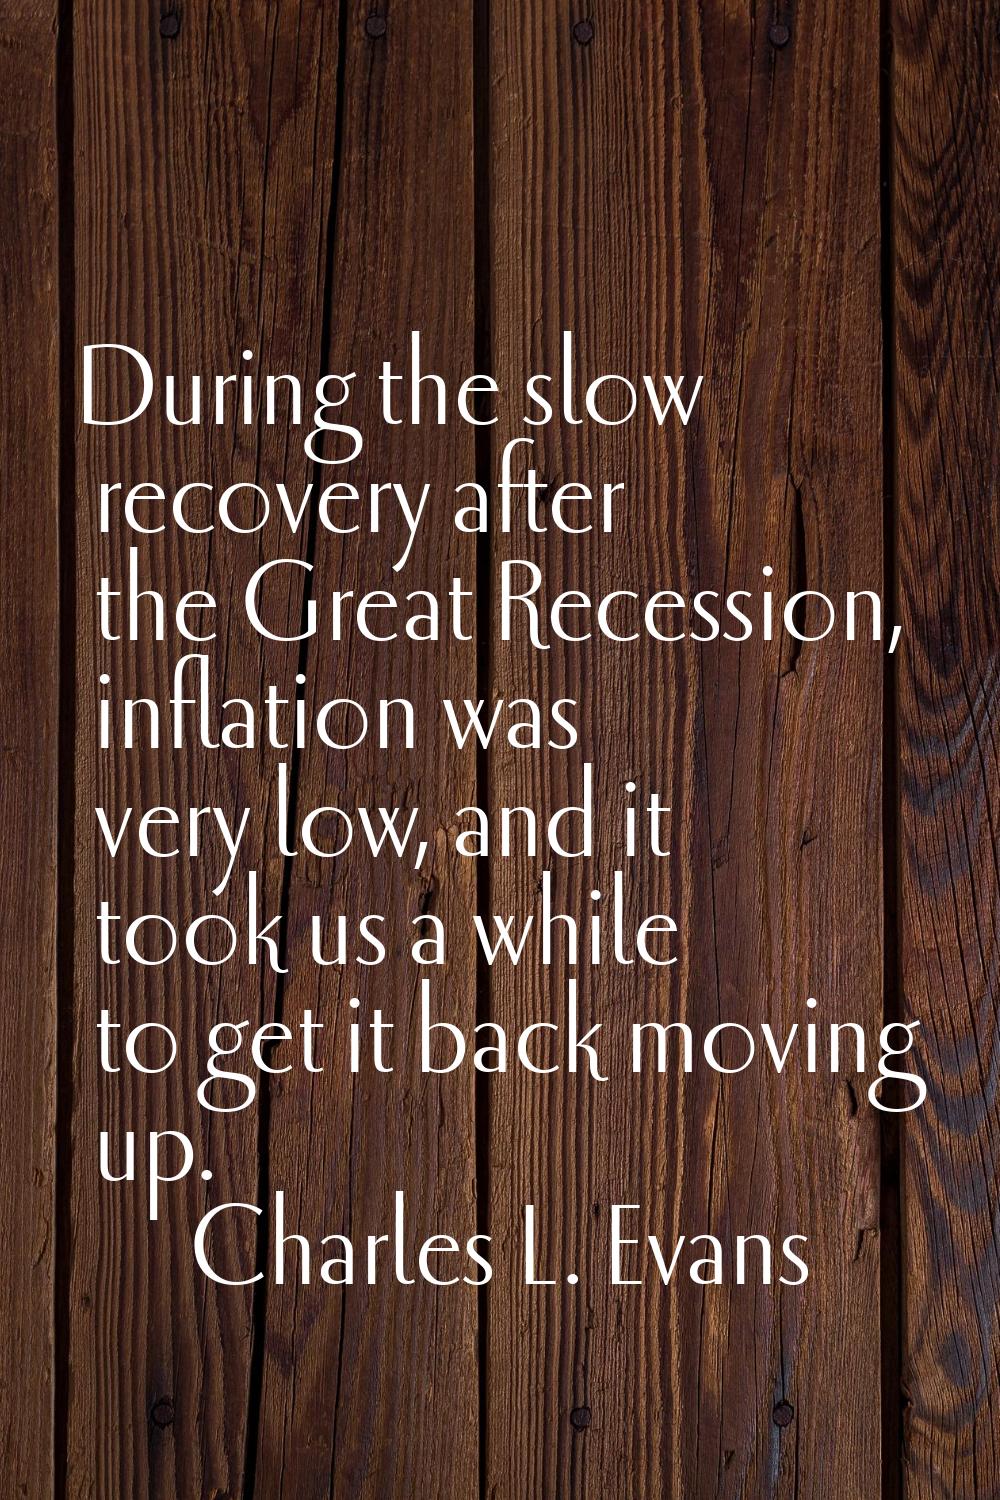 During the slow recovery after the Great Recession, inflation was very low, and it took us a while 